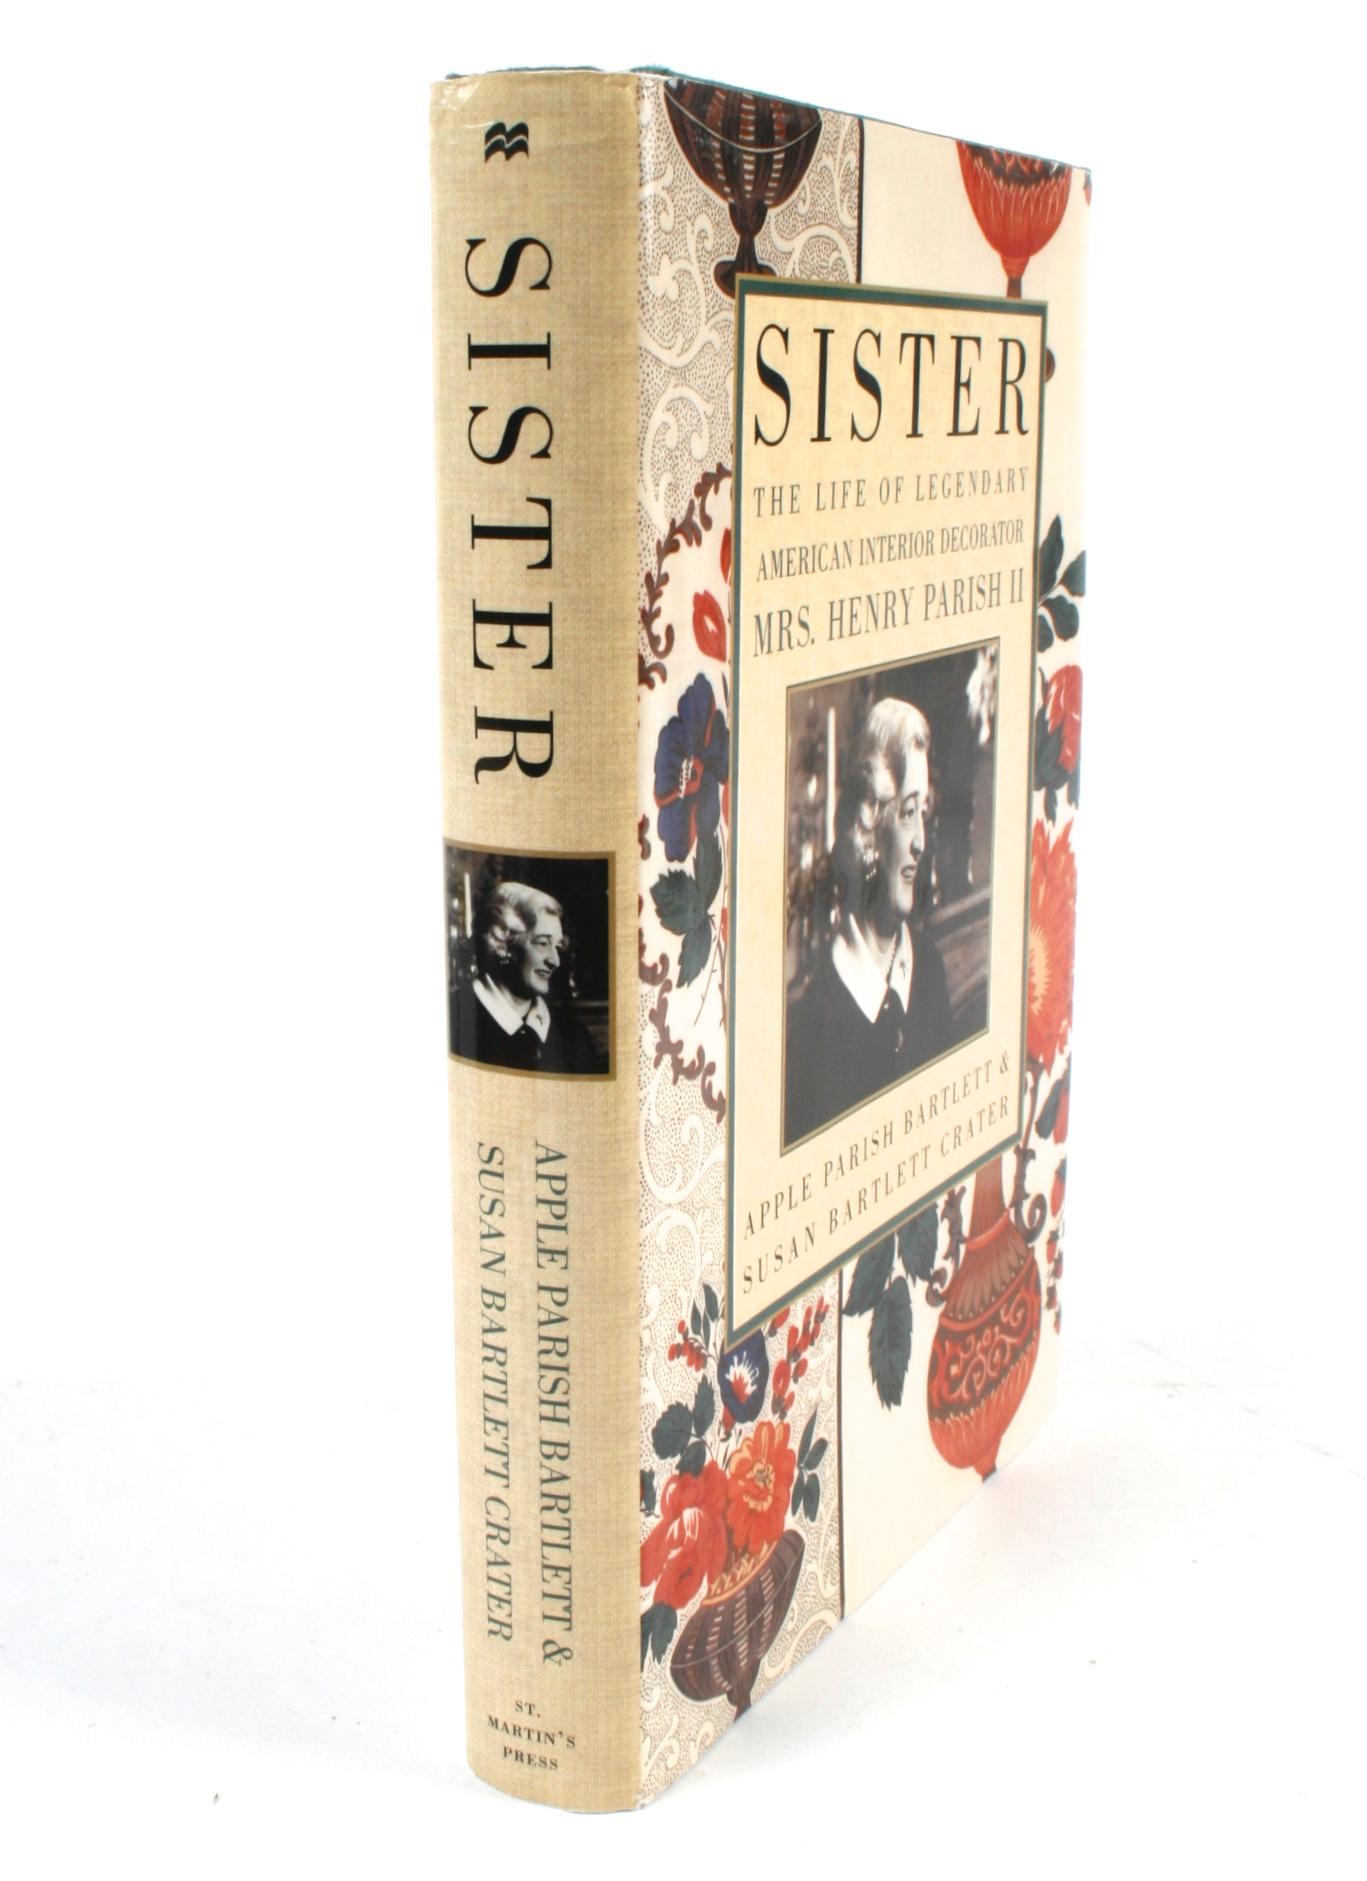 Sister: The Life of Legendary Interior Decorator Mrs. Henry Parish II, by Susan Bartlett Crater, and Apple Parish Bartlett. St. Martin's Press, New York, 2000. Stated 1st Ed hardcover with dust jacket. 